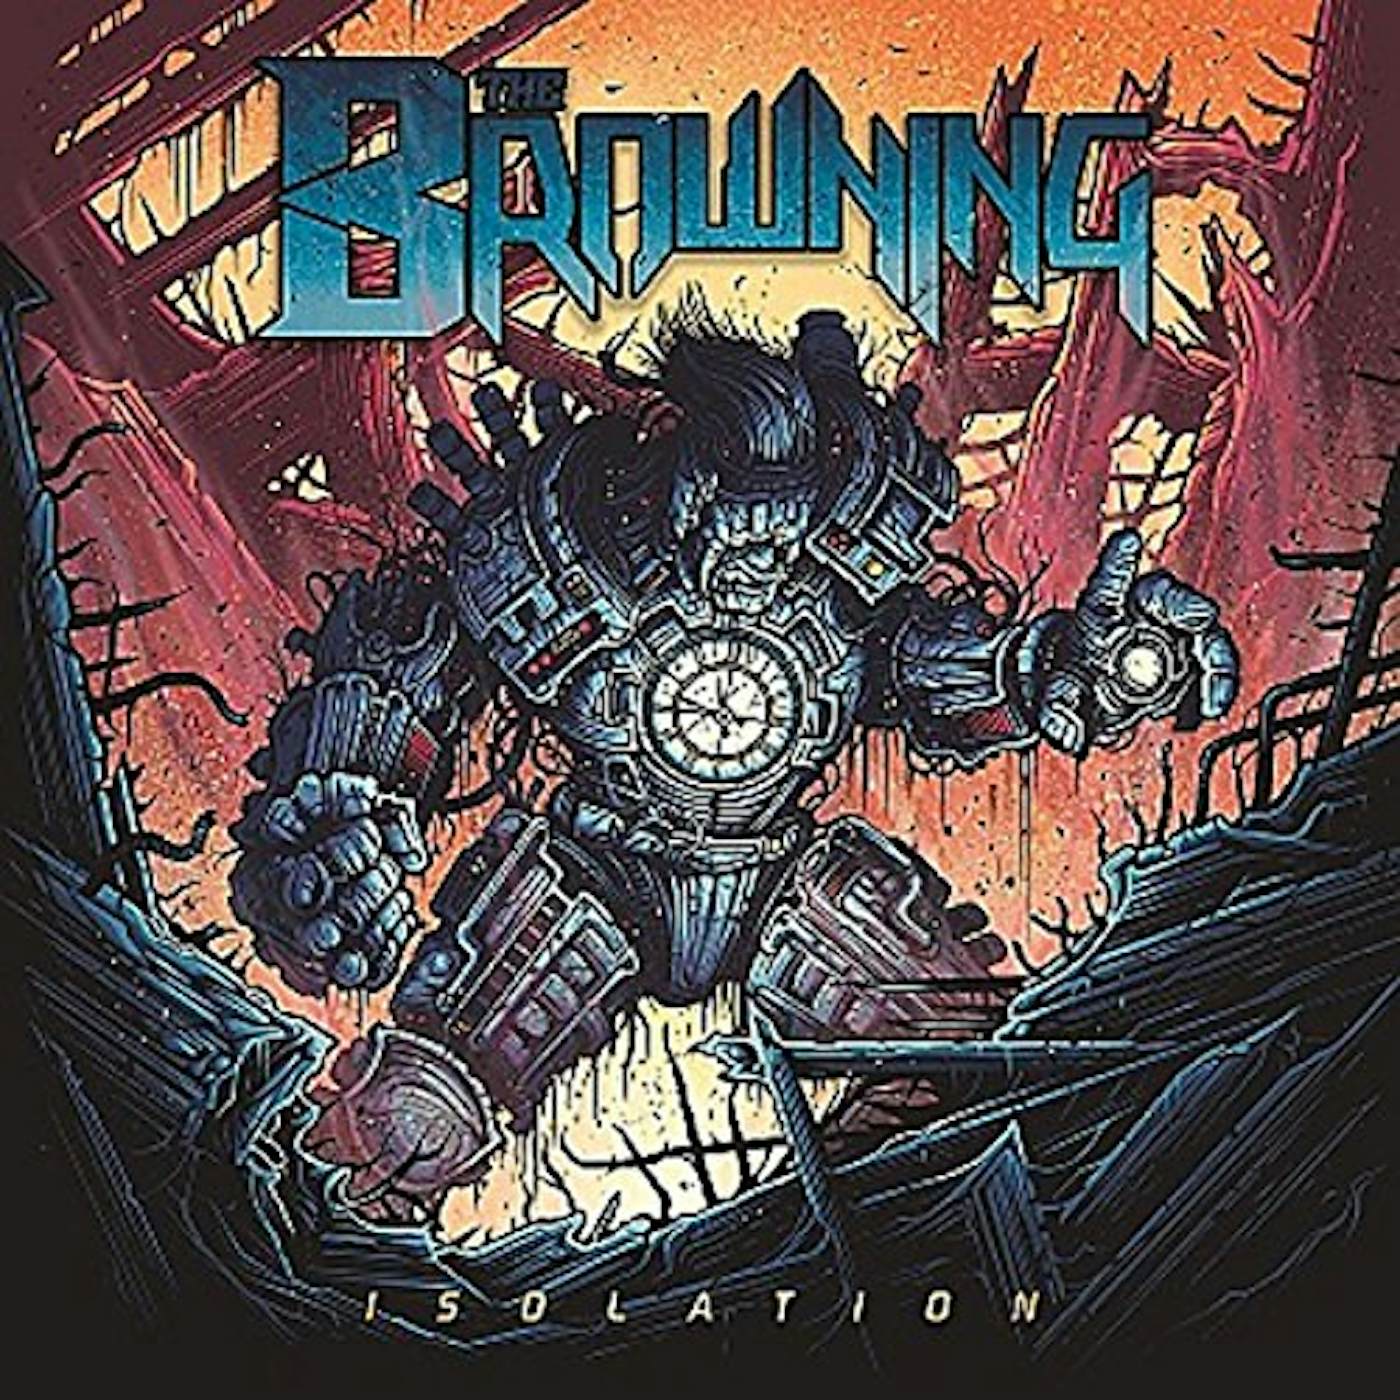 The Browning Isolation Vinyl Record